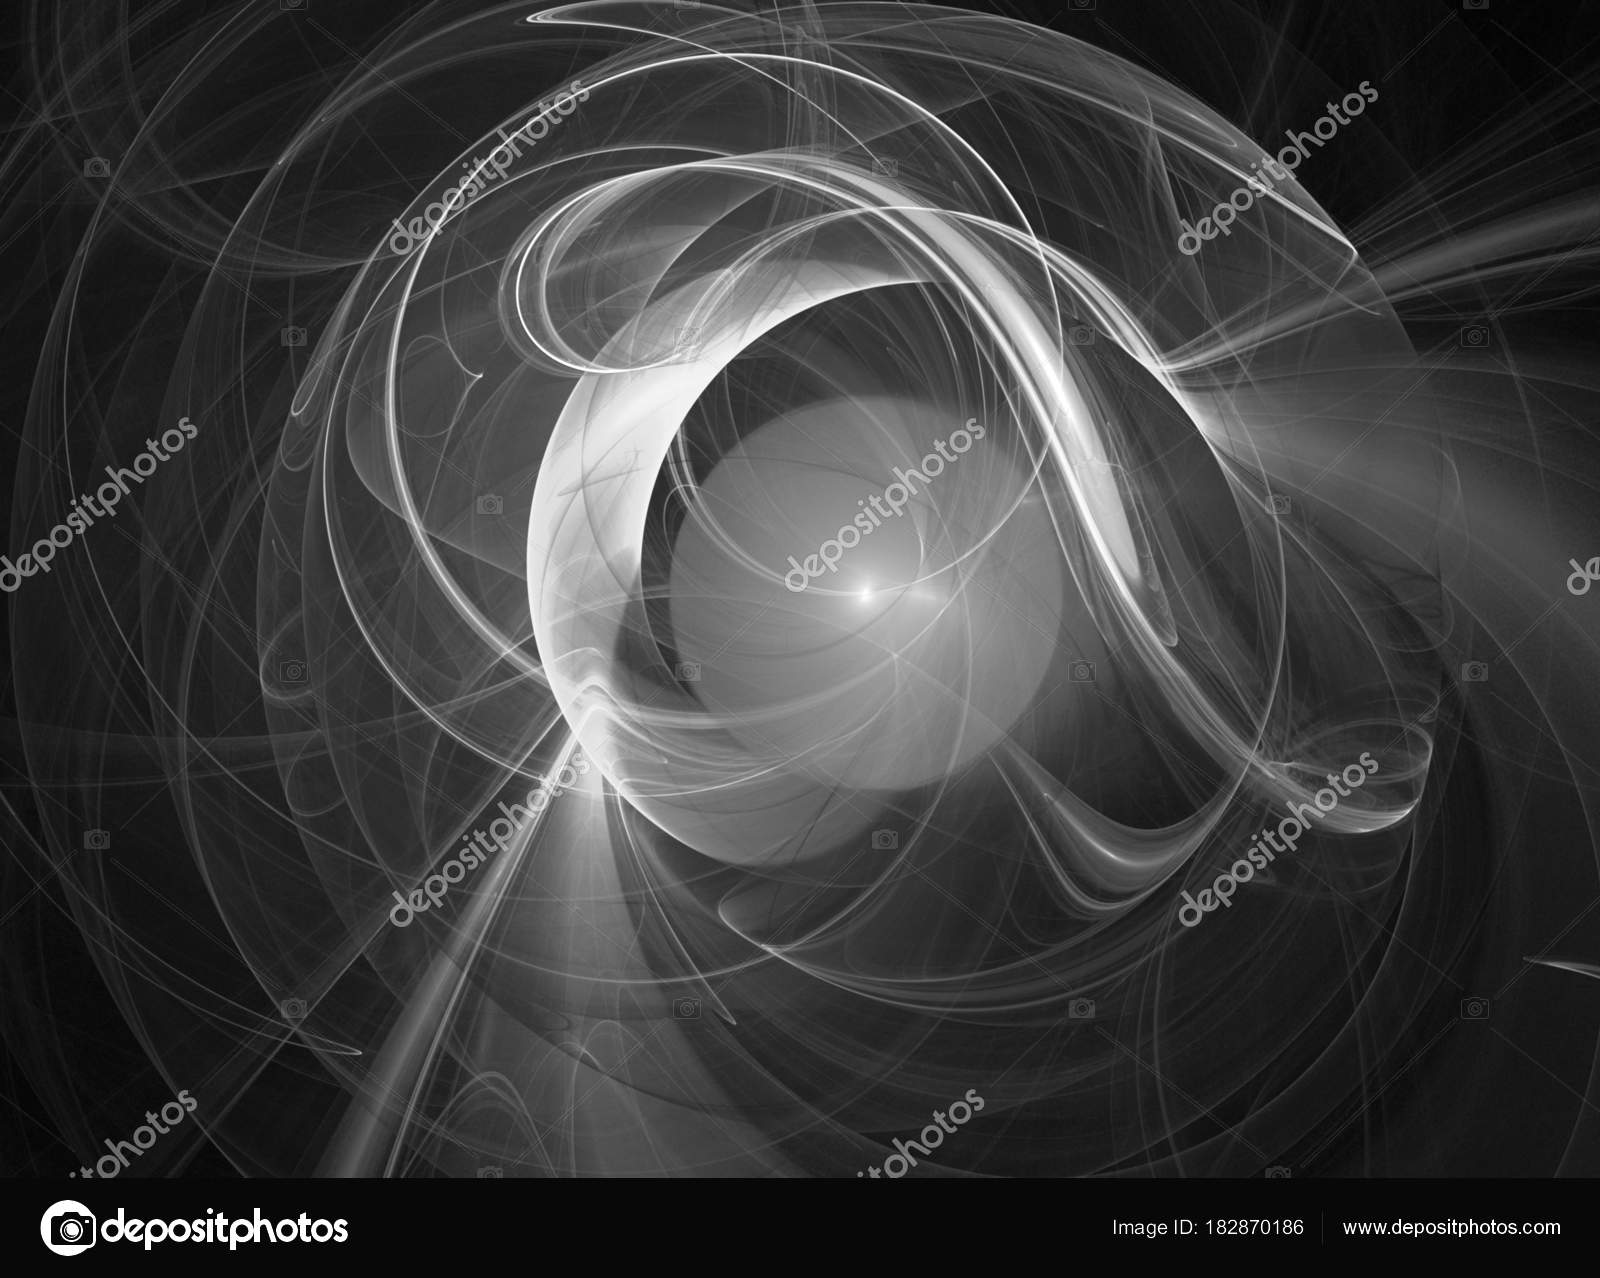 Abstract fractal background — Stock Photo © deltaoff #182870186